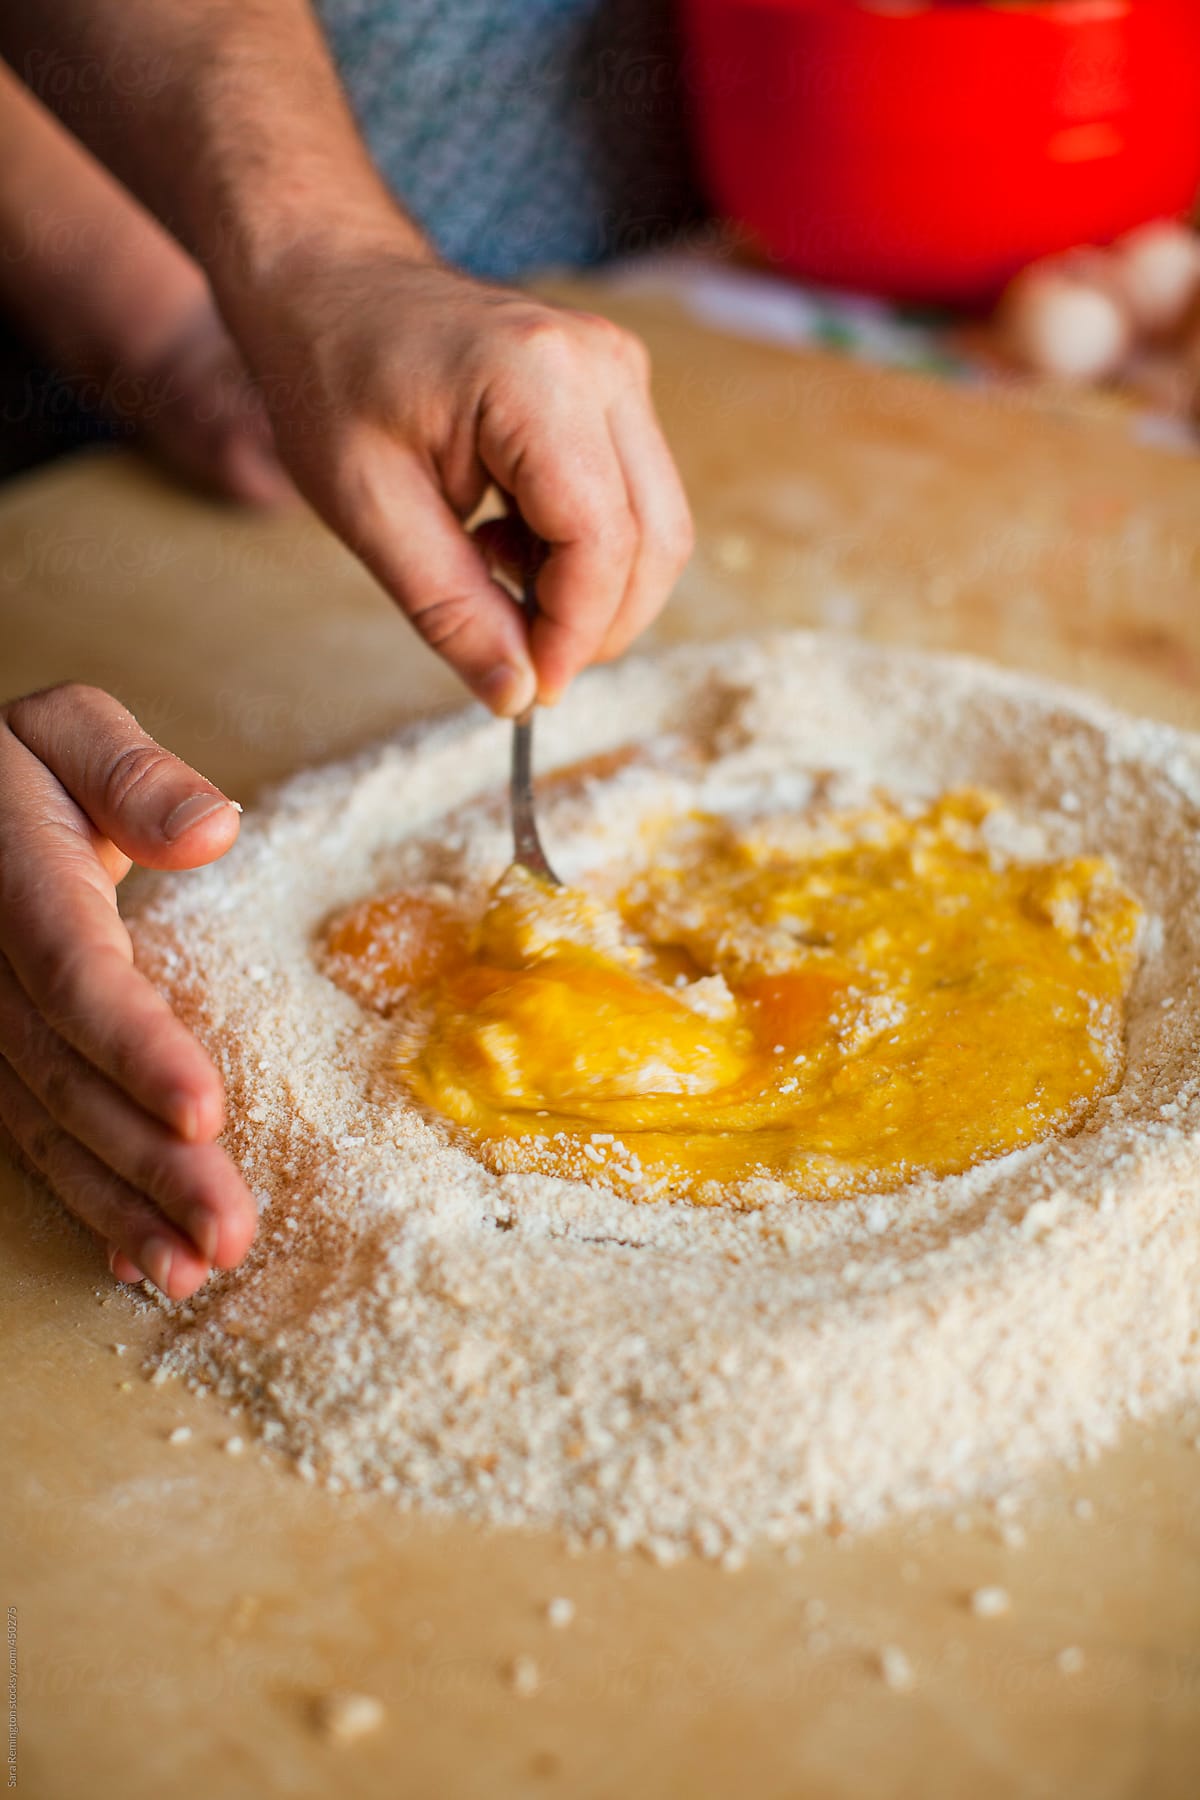 Making Pasta With Flour And Egg